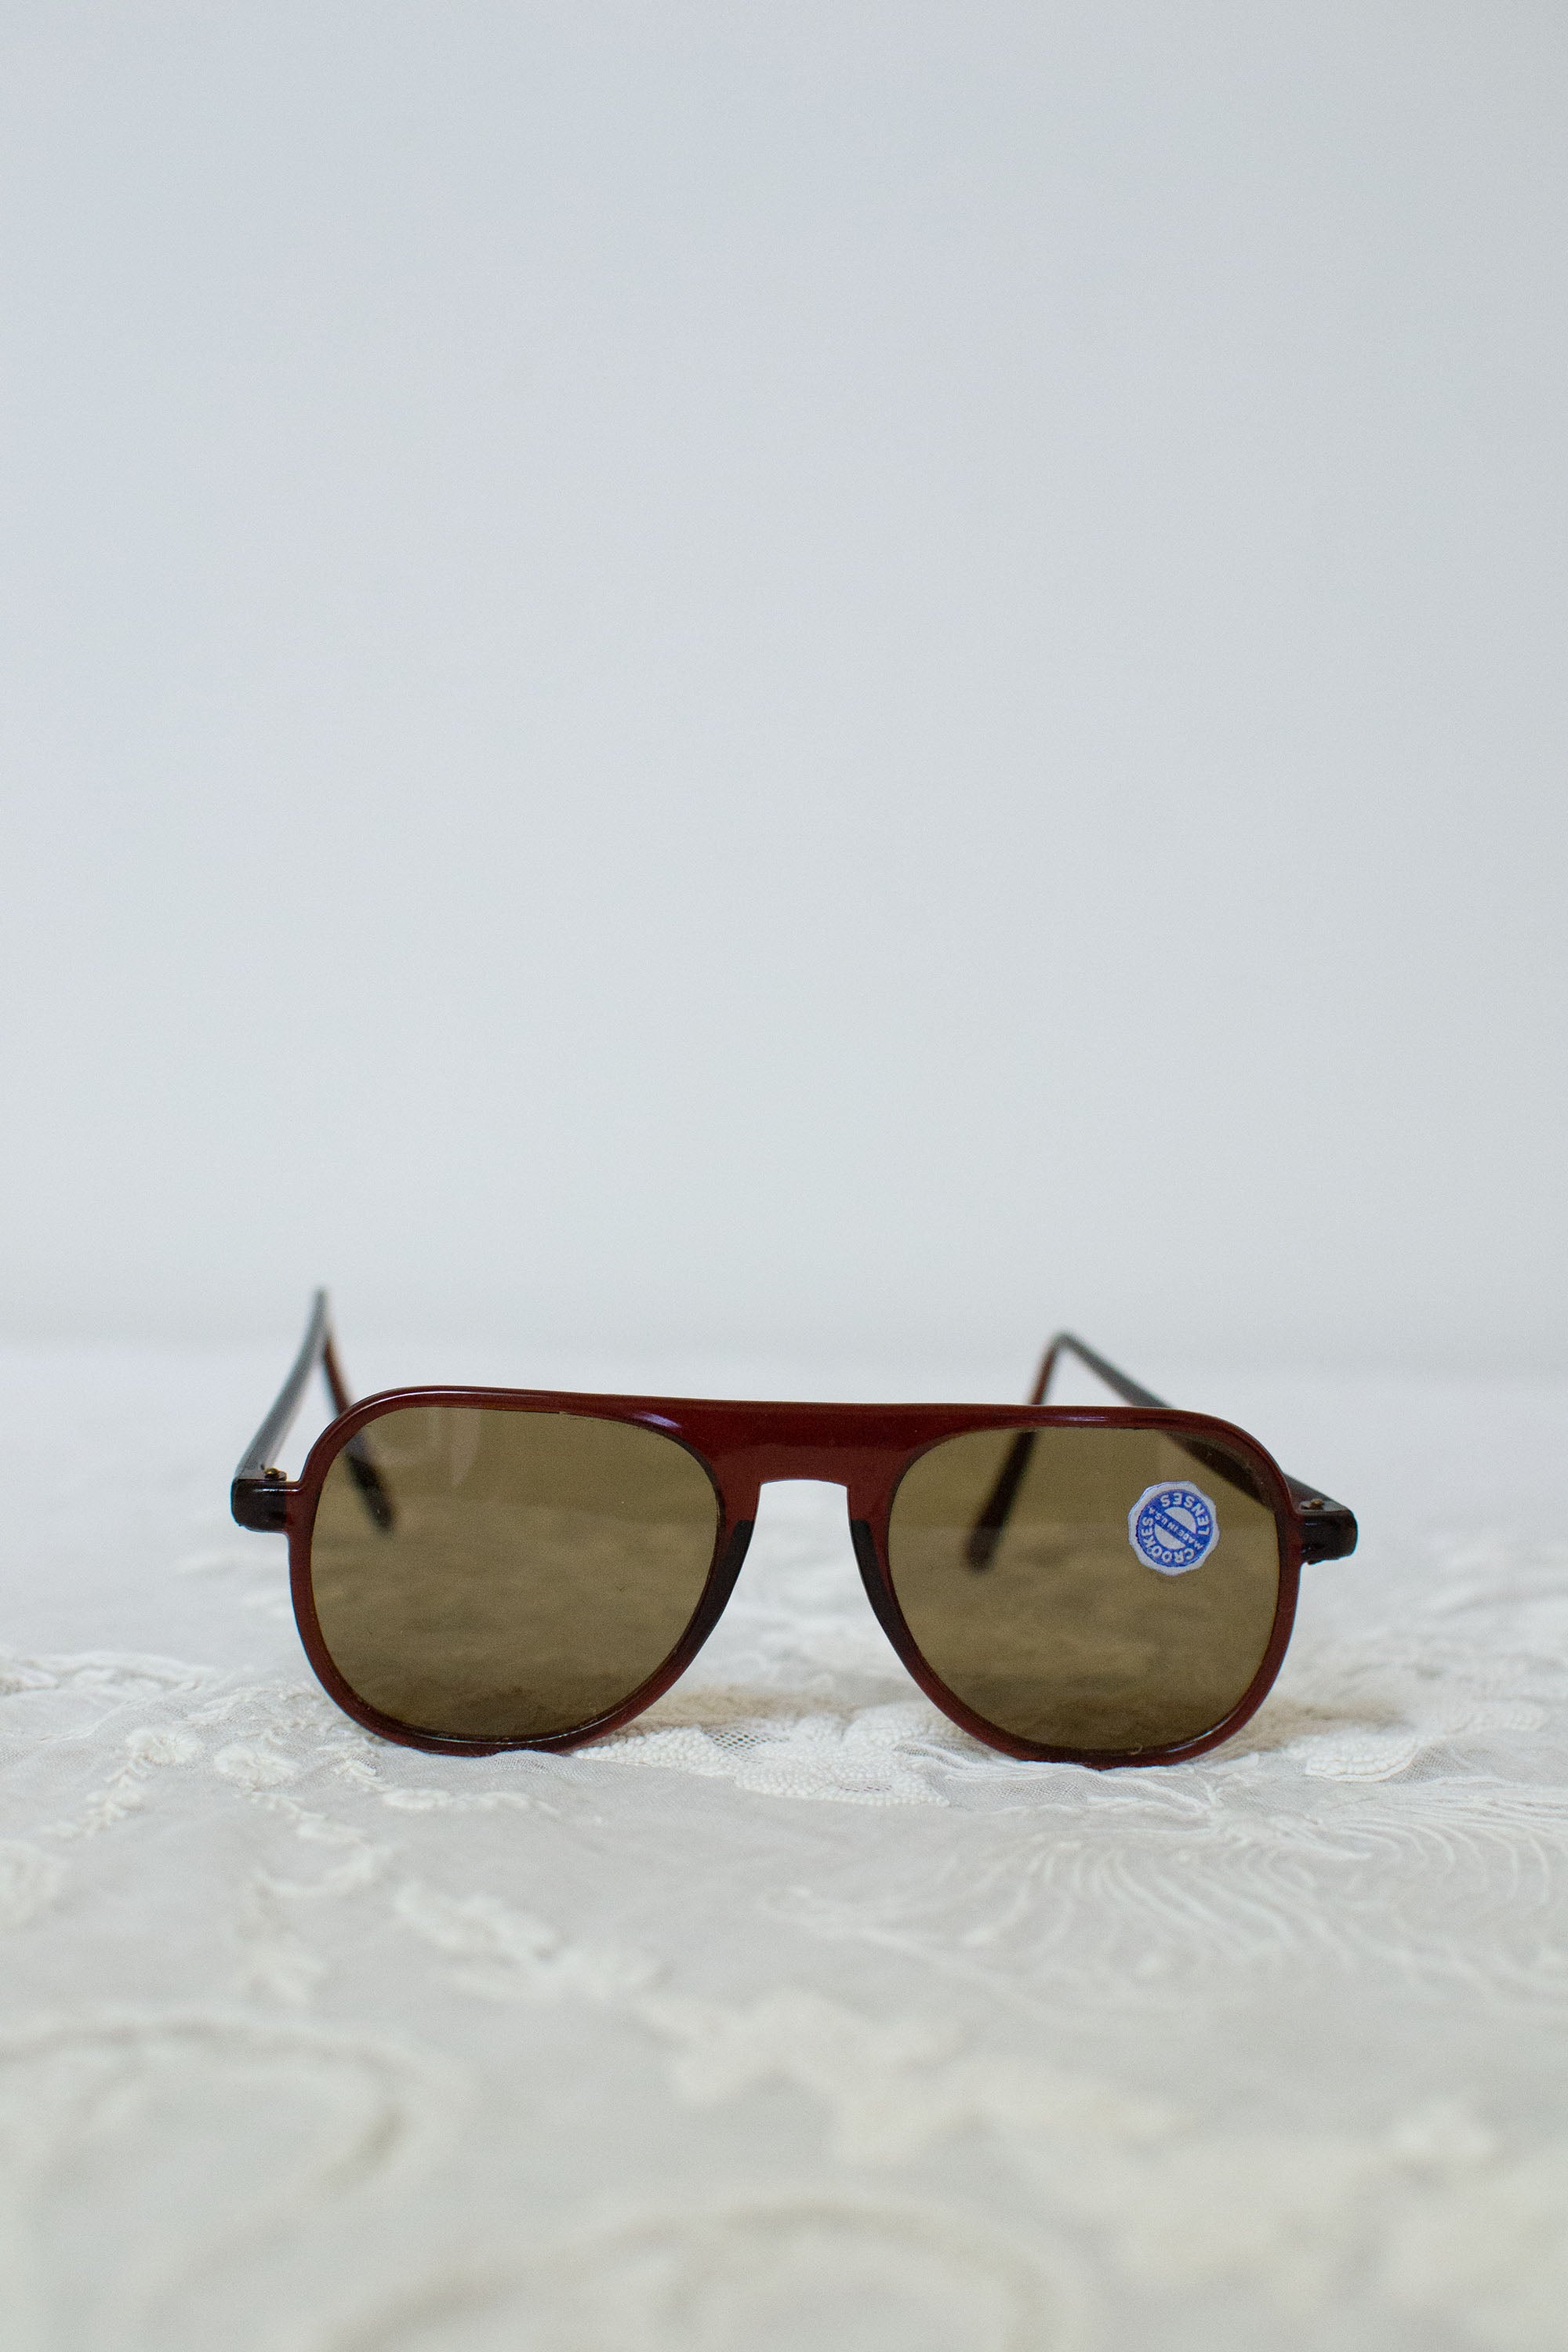 Buy Vintage Sunglasses For Men Online In India At Best Offers | Tata CLiQ